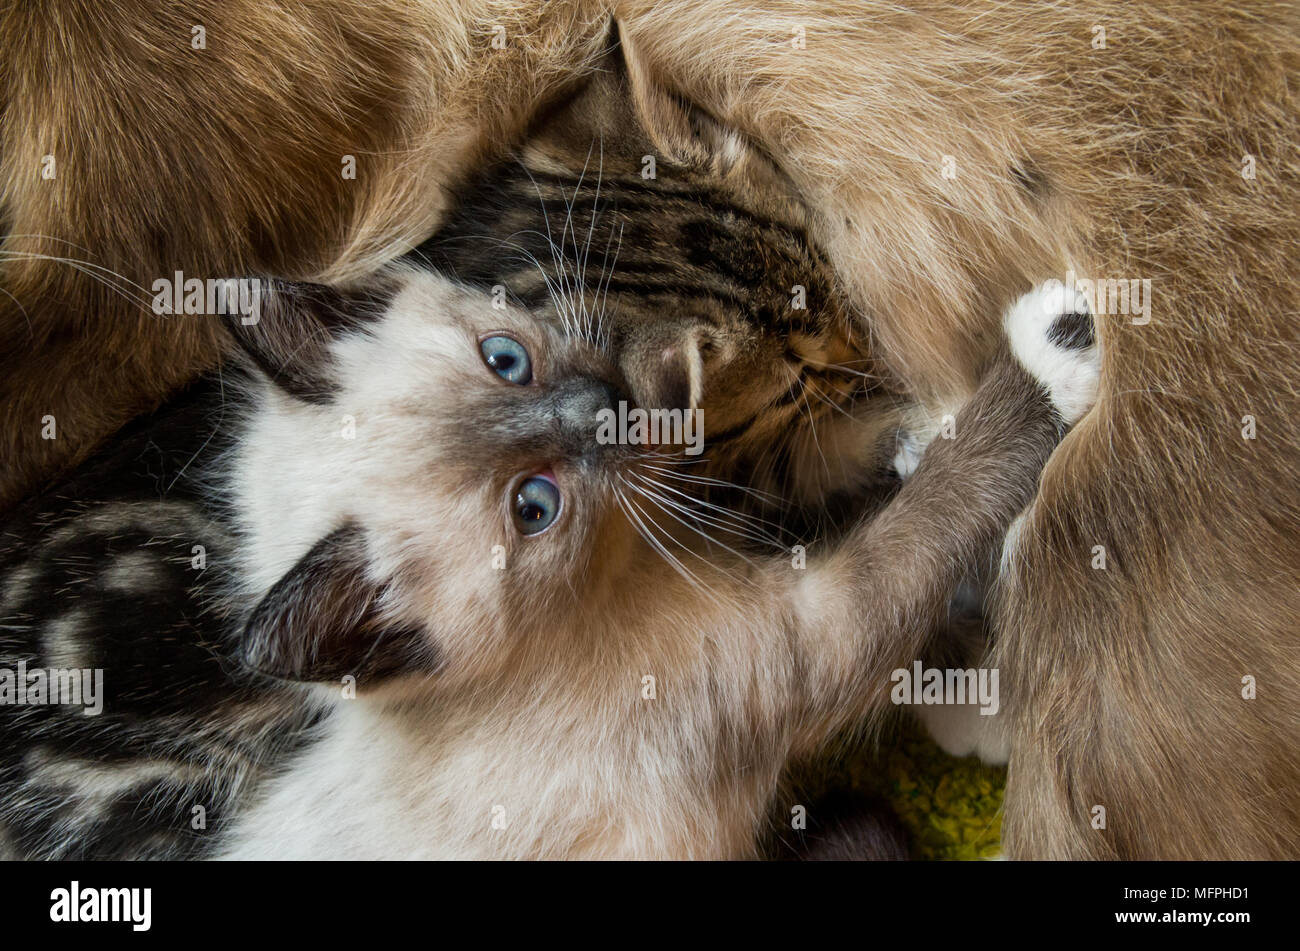 A close up of two kittens sleeping next to their mother, one is looking up and into the camera. Stock Photo